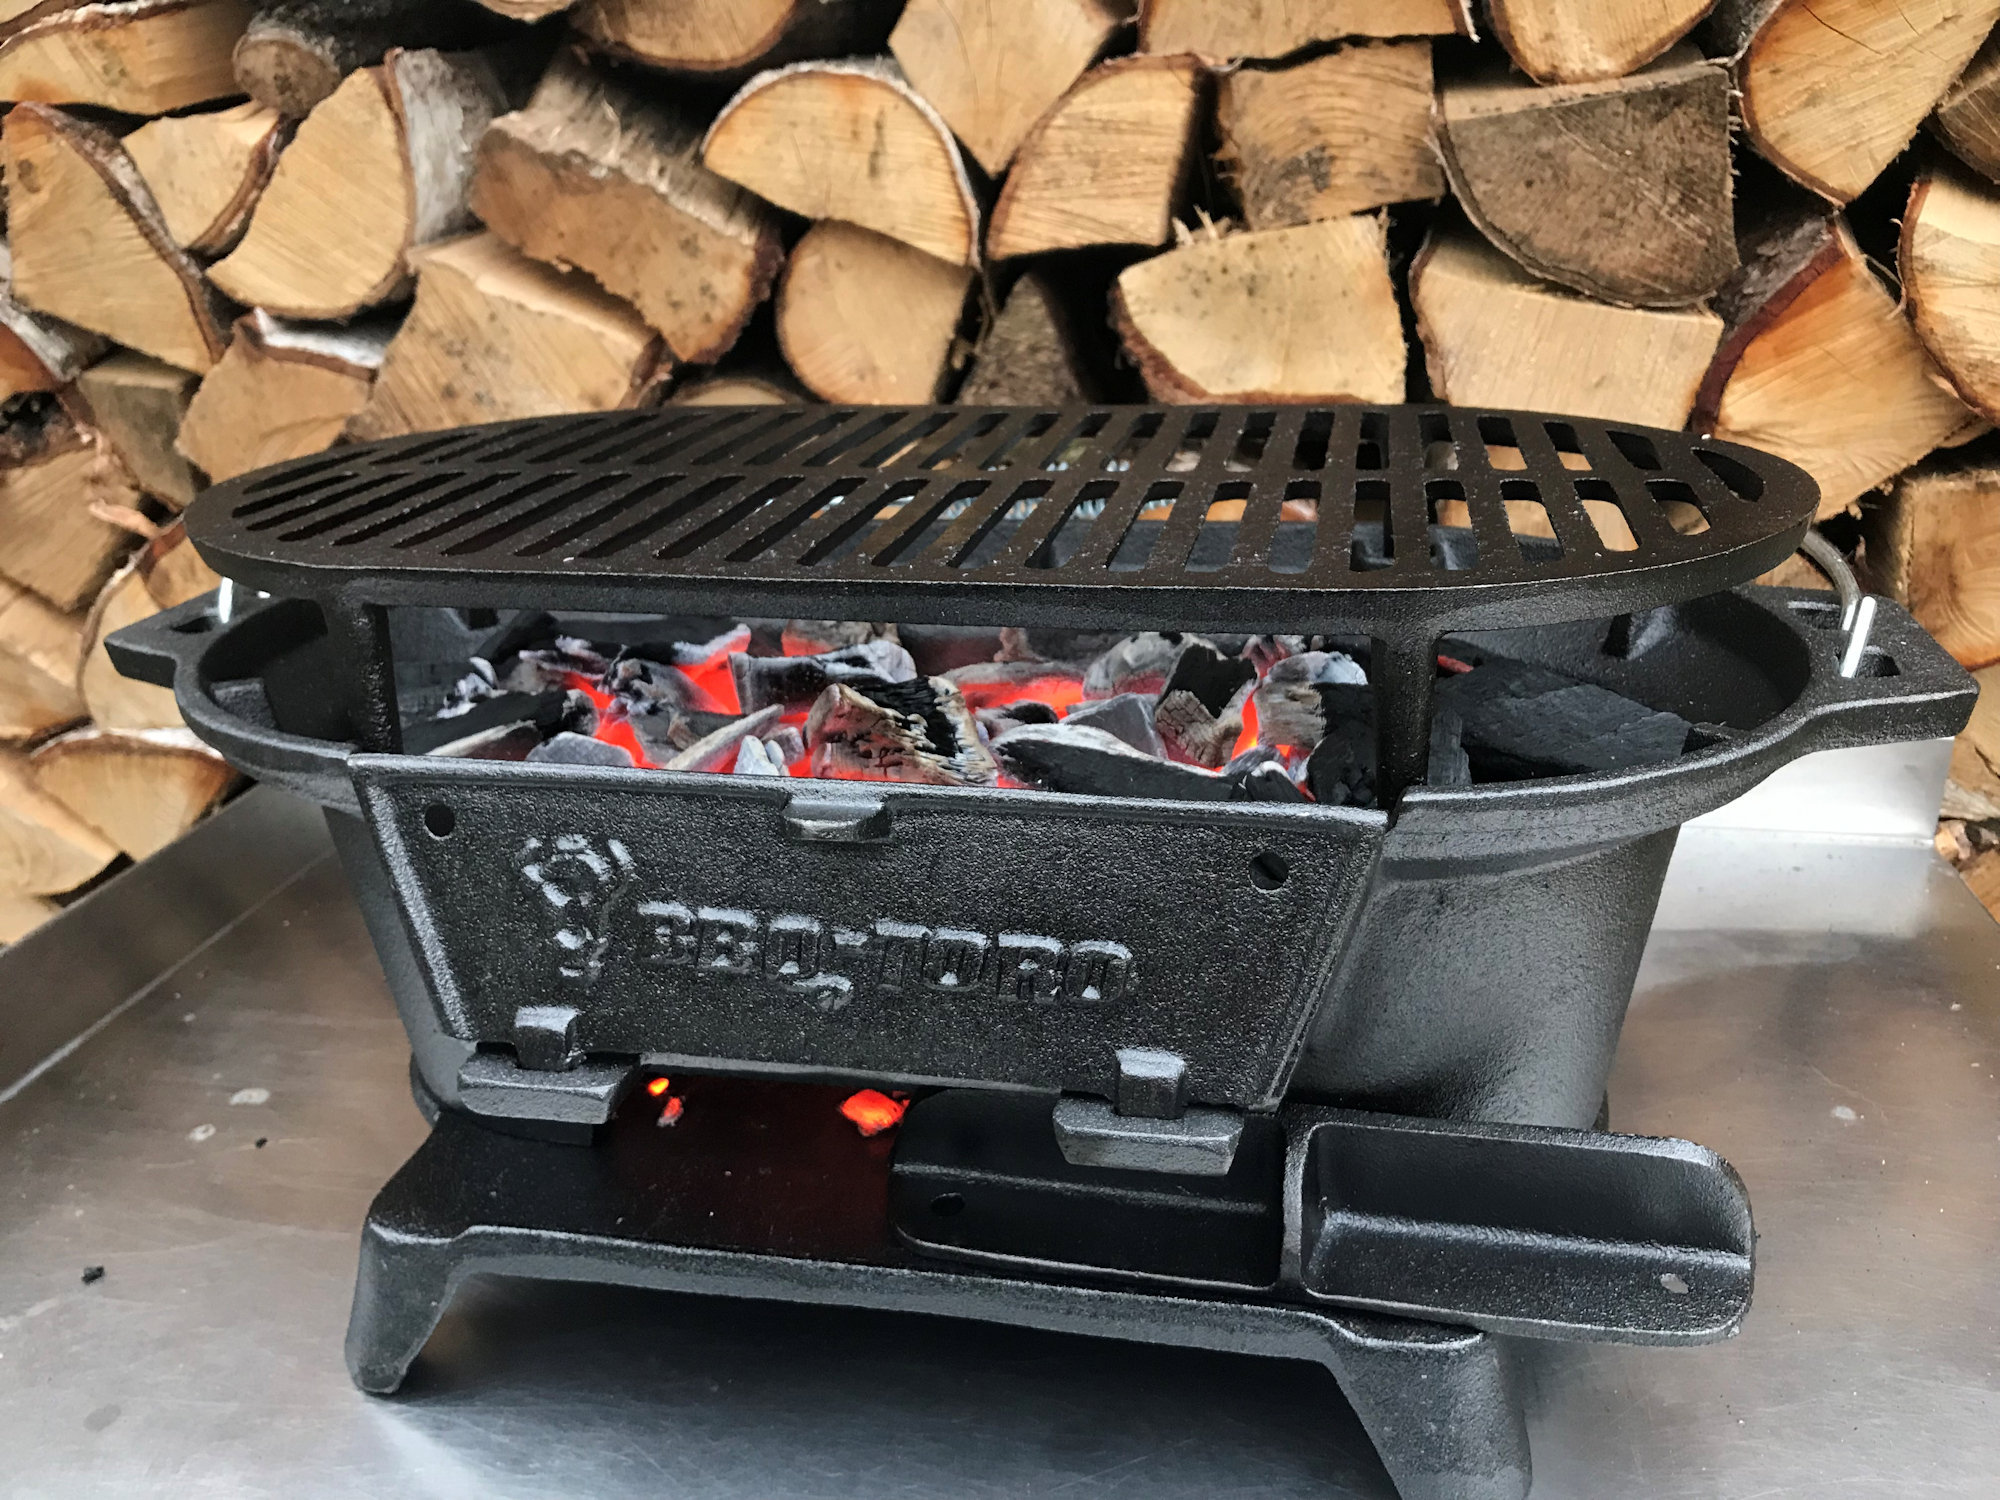 BBQ-Toro Grilltopf Hibachi mit Gusseisen Holzkohle Grillrost Style Campinggrill | eBay